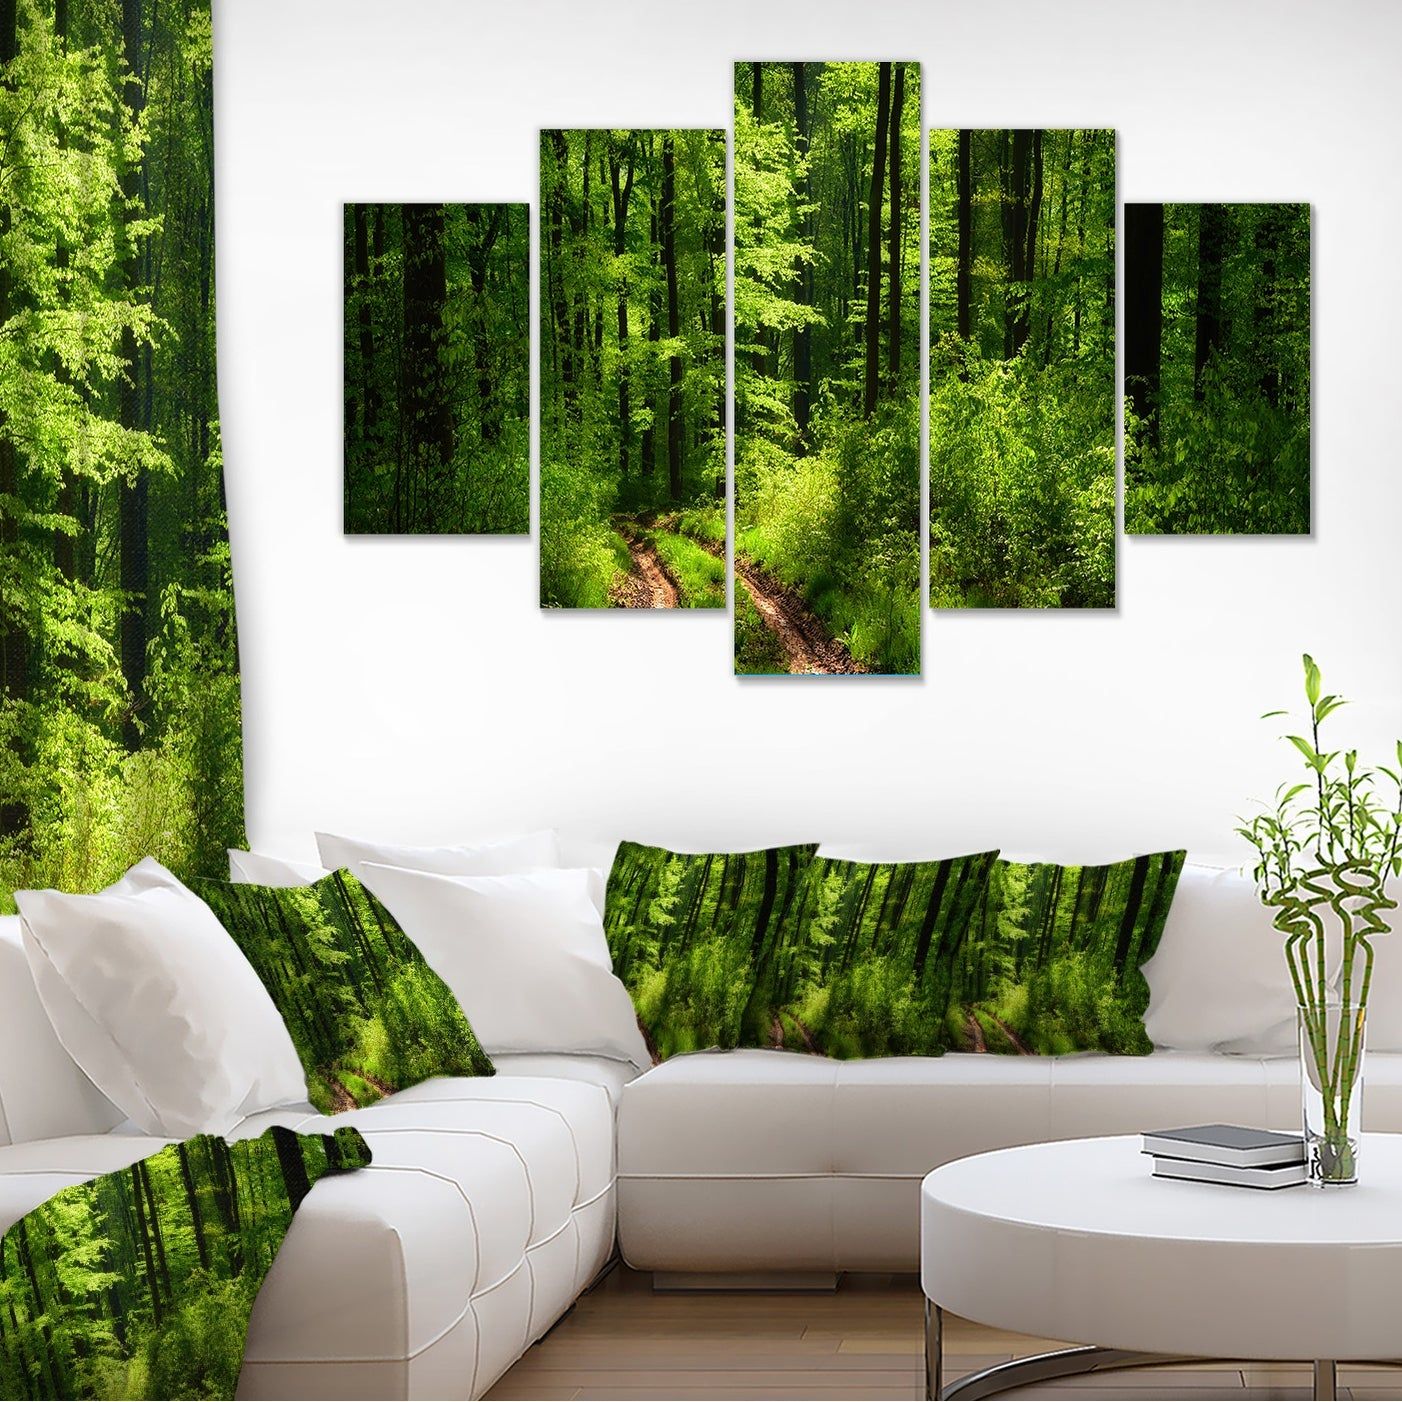 Fascinating Greenery In Wild Forest – Large Forest Wall Art Canvas – On  Sale – Overstock – 12302530 Regarding Most Up To Date Forest Wall Art (View 17 of 20)